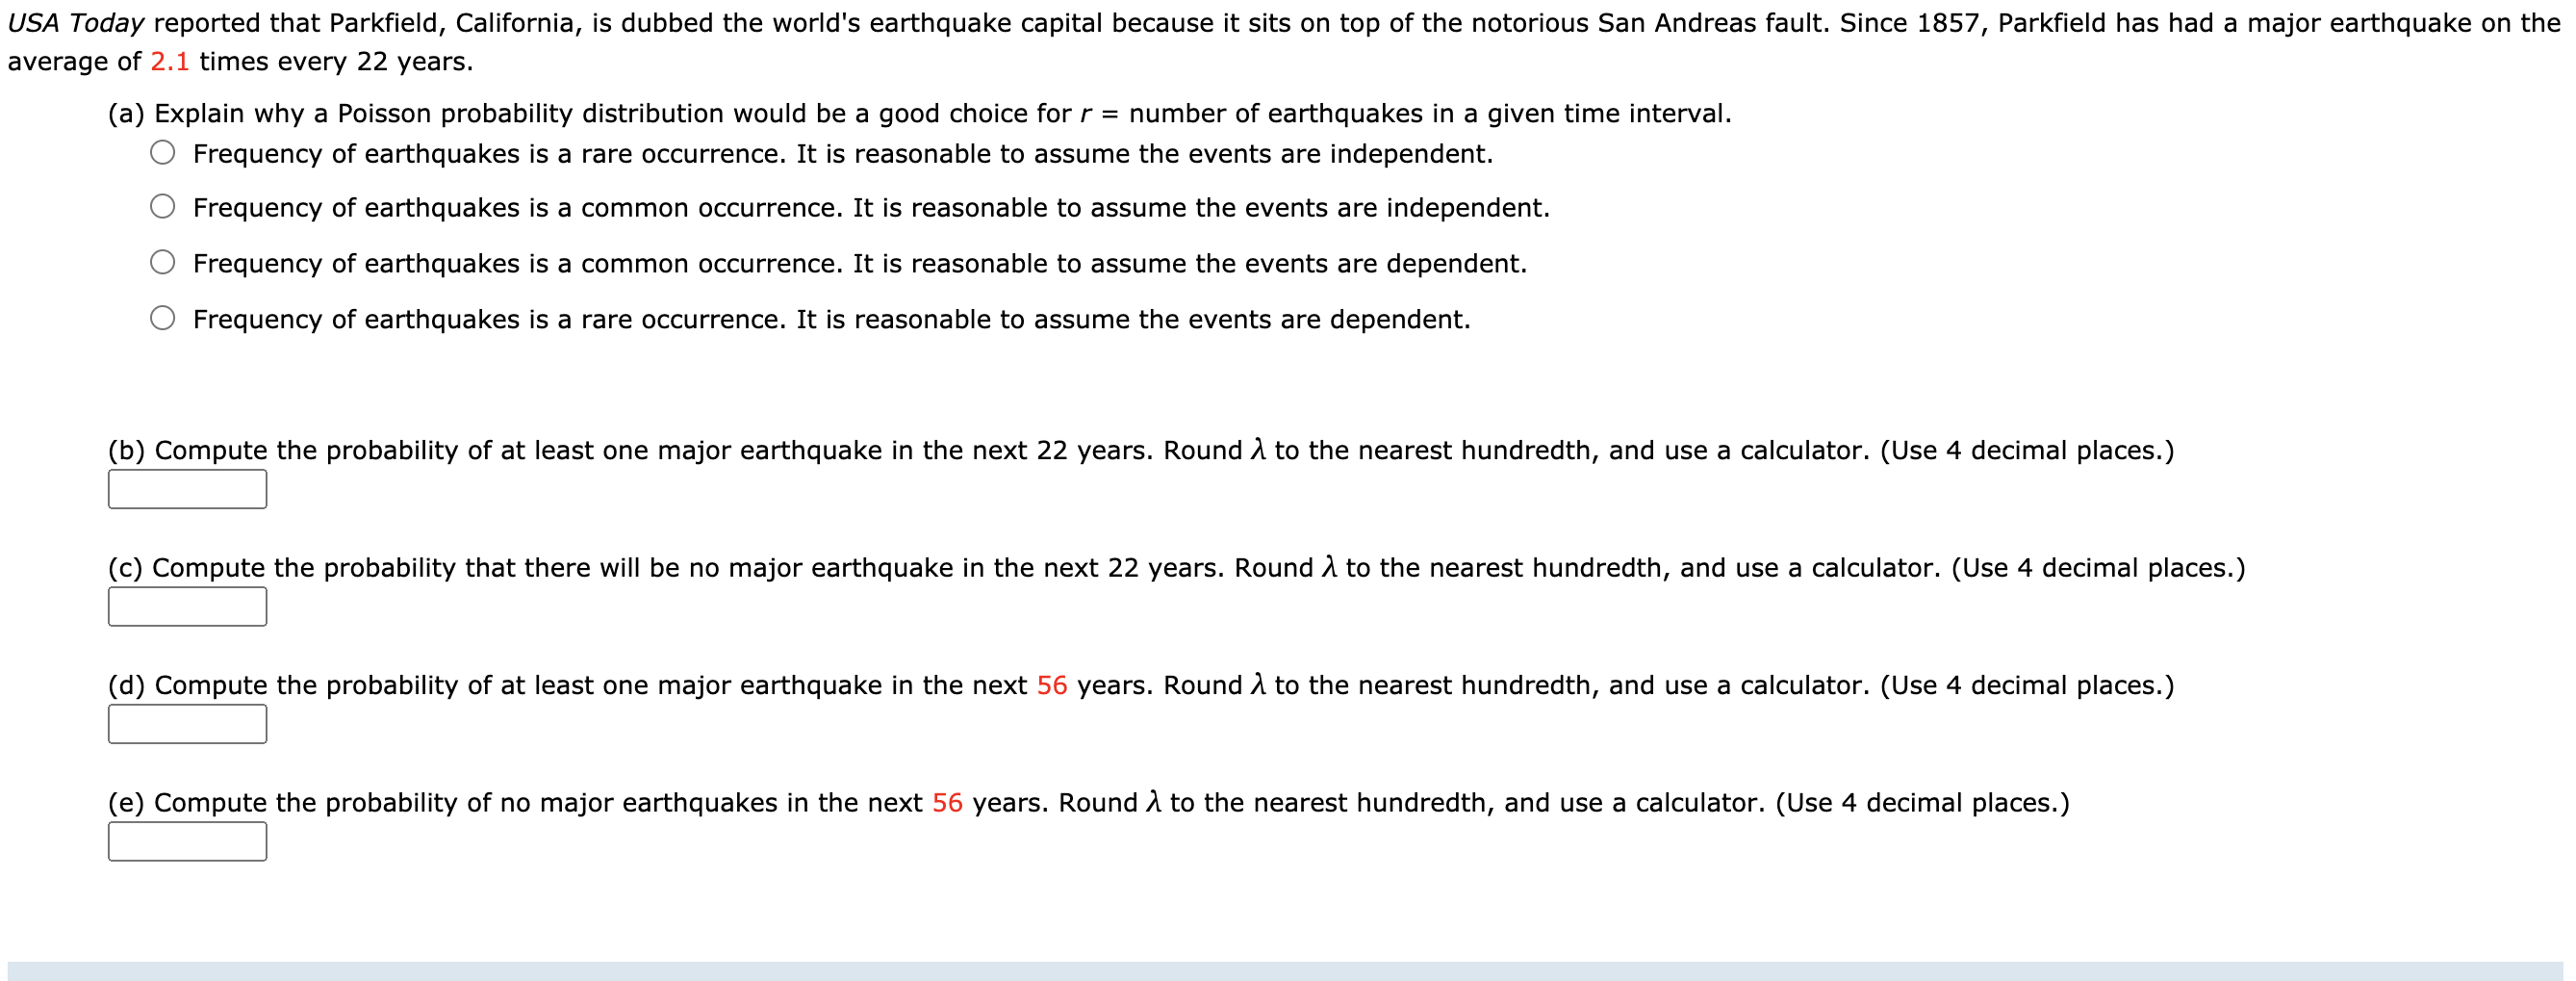 USA Today reported that Parkfield, California, is dubbed the world's earthquake capital because it sits on top of the notorious San Andreas fault. Since 1857, Parkfield has had a major earthquake on the
average of 2.1 times every 22 years.
(a) Explain why a Poisson probability distribution would be a good choice for r =
number of earthquakes in a given time interval.
Frequency of earthquakes is a rare occurrence. It is reasonable to assume the events are independent.
Frequency of earthquakes is a common occurrence. It is reasonable to assume the events are independent.
Frequency of earthquakes is a common occurrence. It is reasonable to assume the events are dependent.
O Frequency of earthquakes is a rare occurrence. It is reasonable to assume the events are dependent.
(b) Compute the probability of at least one major earthquake in the next 22 years. Round A to the nearest hundredth, and use a calculator. (Use 4 decimal places.)
(c) Compute the probability that there will be no major earthquake in the next 22 years. Round A to the nearest hundredth, and use a calculator. (Use 4 decimal places.)
(d) Compute the probability of at least one major earthquake in the next 56 years. Round A to the nearest hundredth, and use a calculator. (Use 4 decimal places.)
(e) Compute the probability of no major earthquakes in the next 56 years. Round A to the nearest hundredth, and use a calculator. (Use 4 decimal places.)
